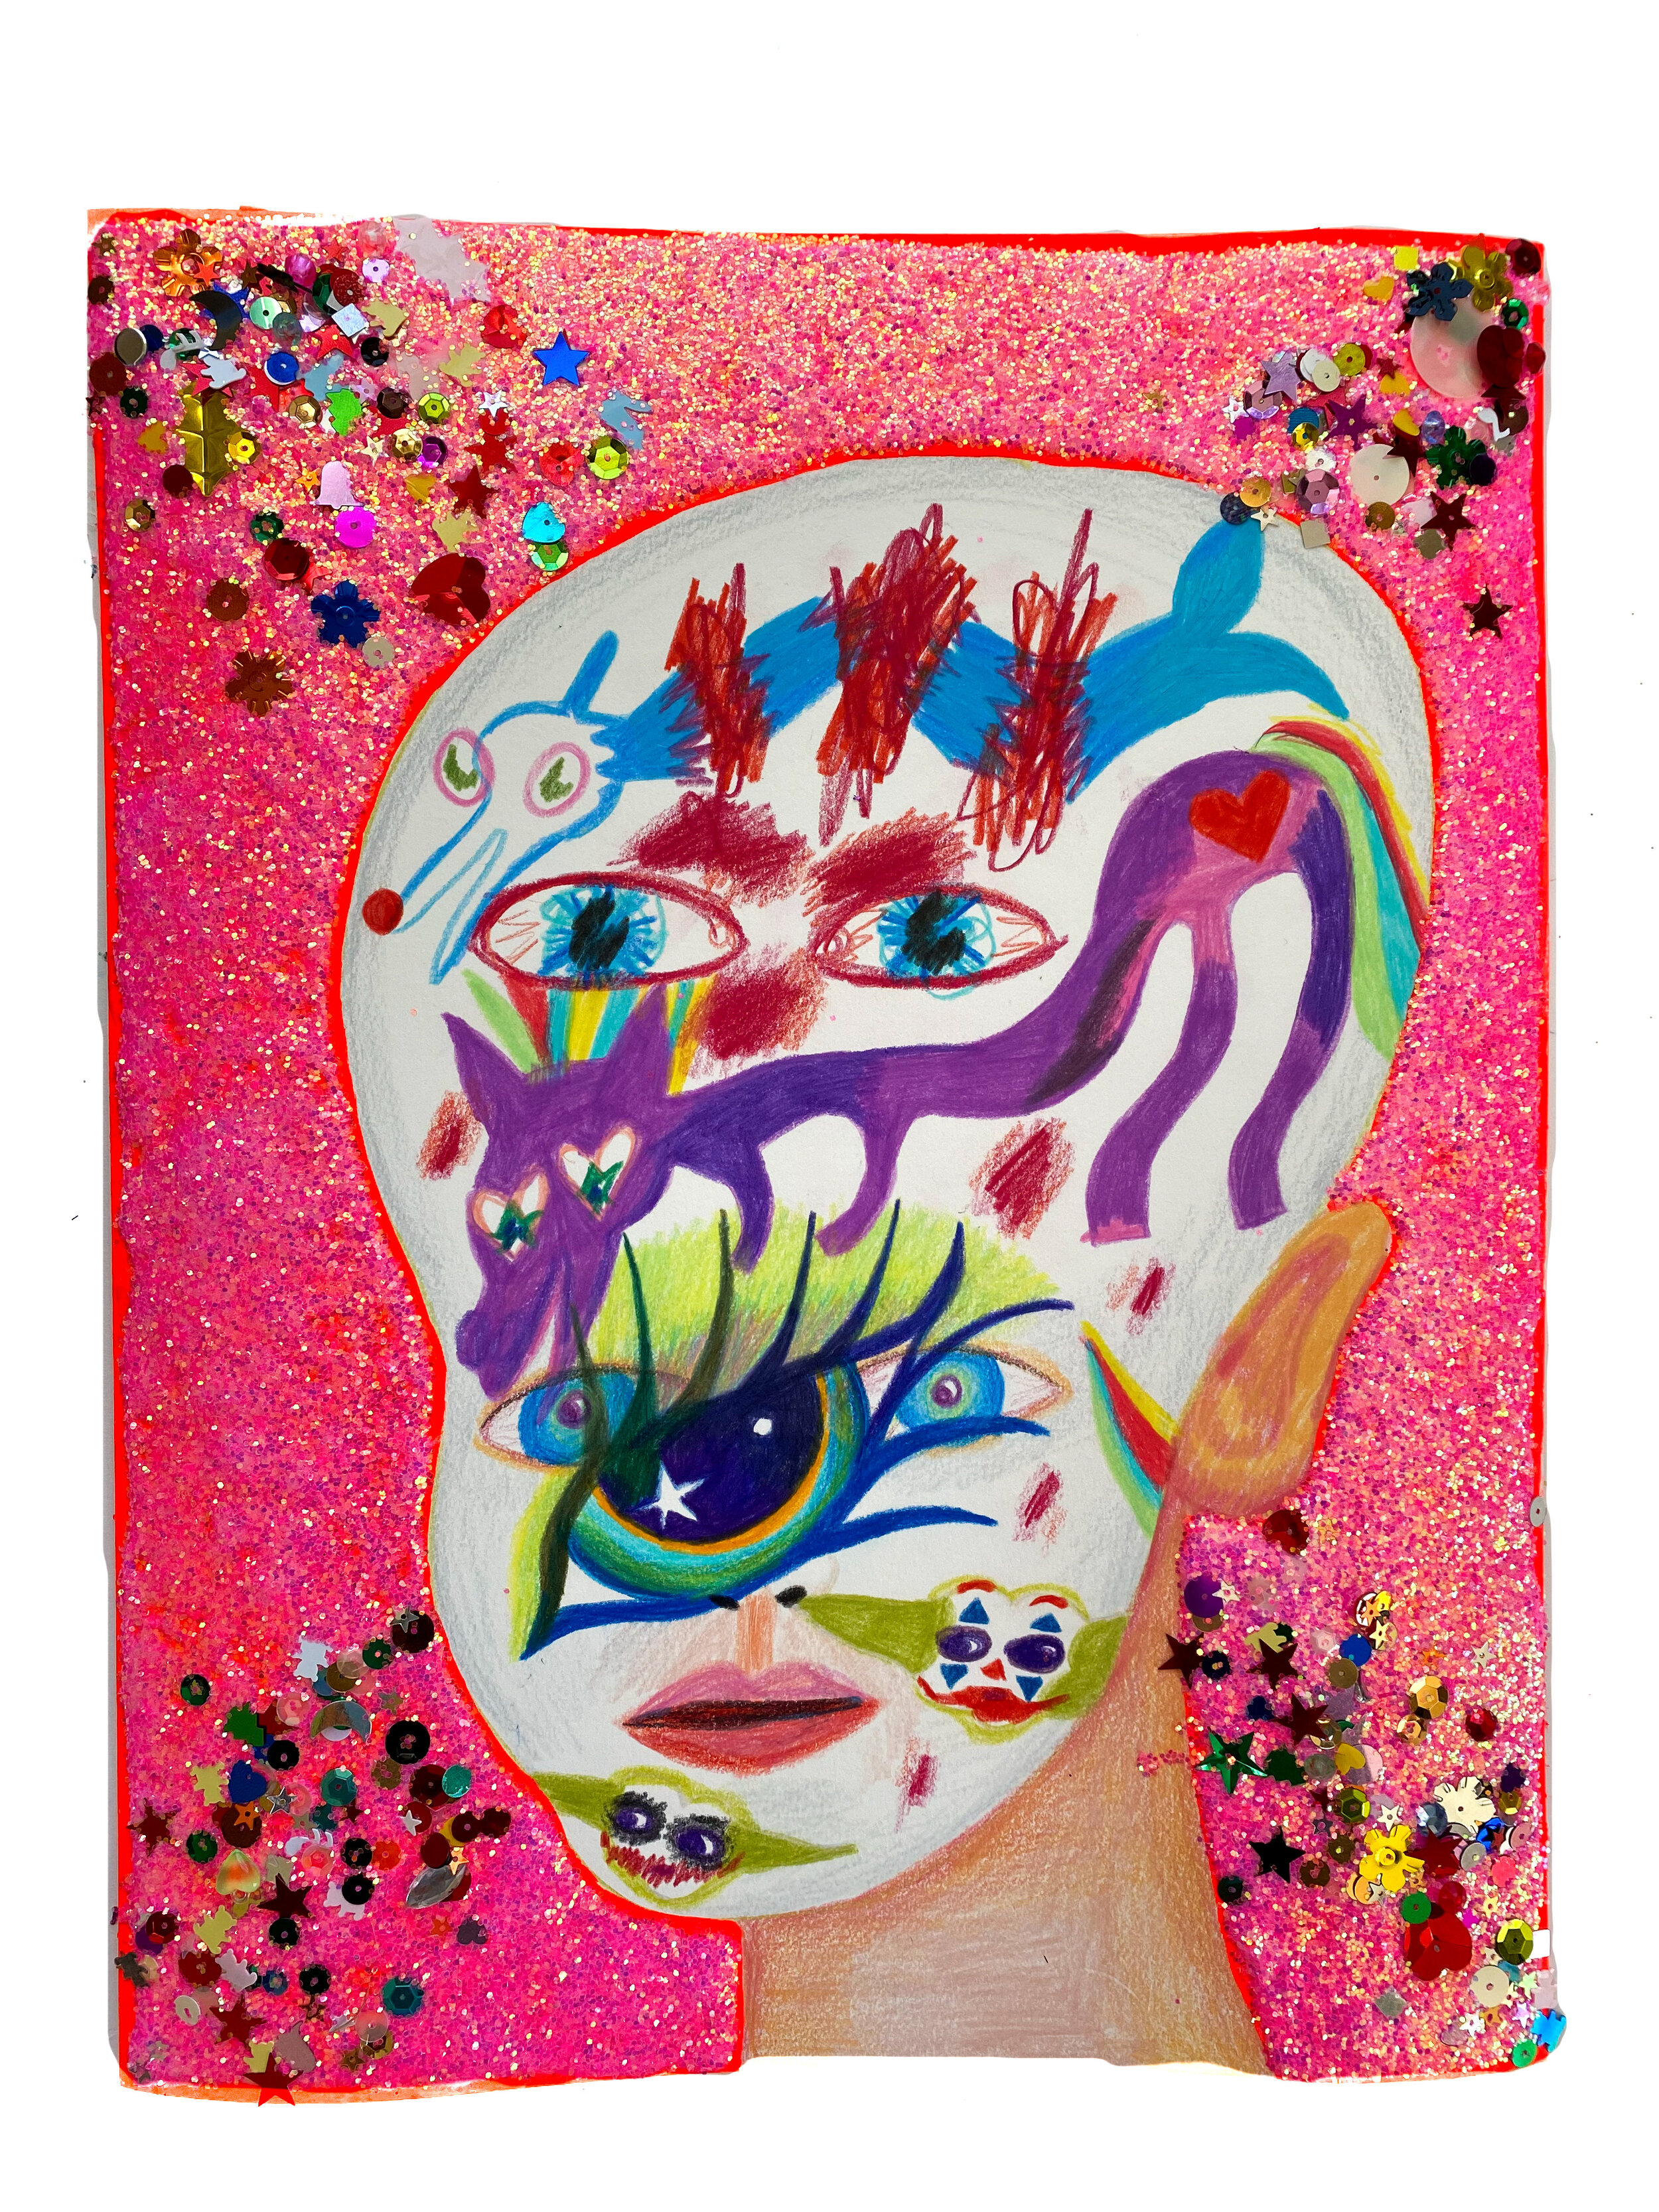   Baby with Baby Grogu as Movie Jokers / Ashamed Girls Pony #10 / Join or Die Dolphin Face Paint),  2021  14 x 11 inches (38.1 x 27.94 cm.)  Colored pencil, sequins, acrylic paint, Elmer's glue, Modge Podge, and glitter on paper 